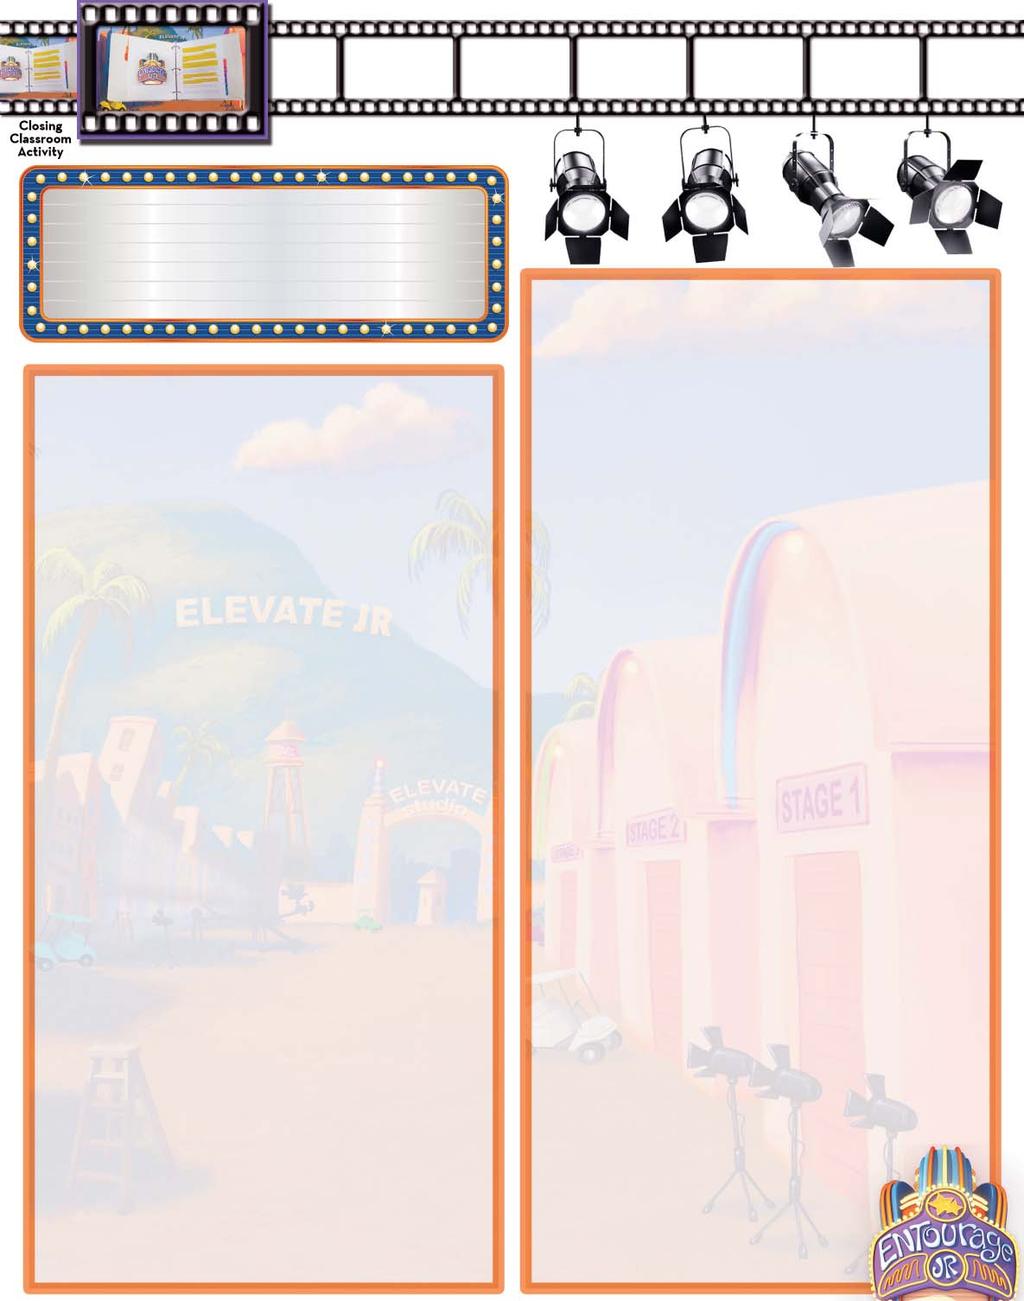 Pick Up Time Classroom Activity Movie Memory Game This activity will help the children remember their lesson for the day while they are waiting to be picked up.